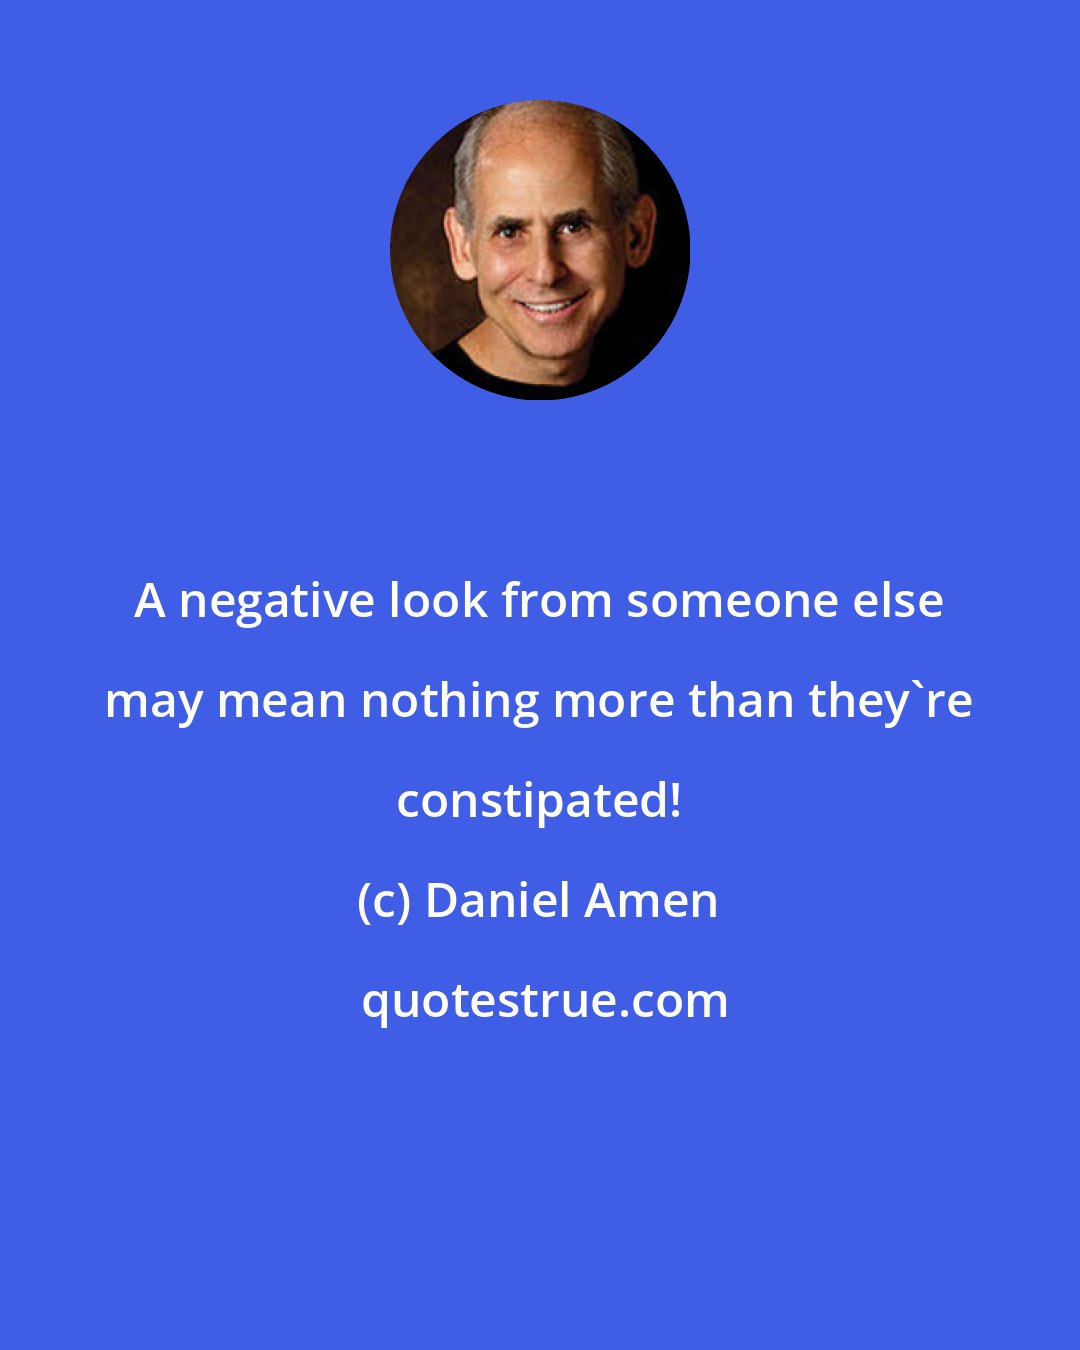 Daniel Amen: A negative look from someone else may mean nothing more than they're constipated!